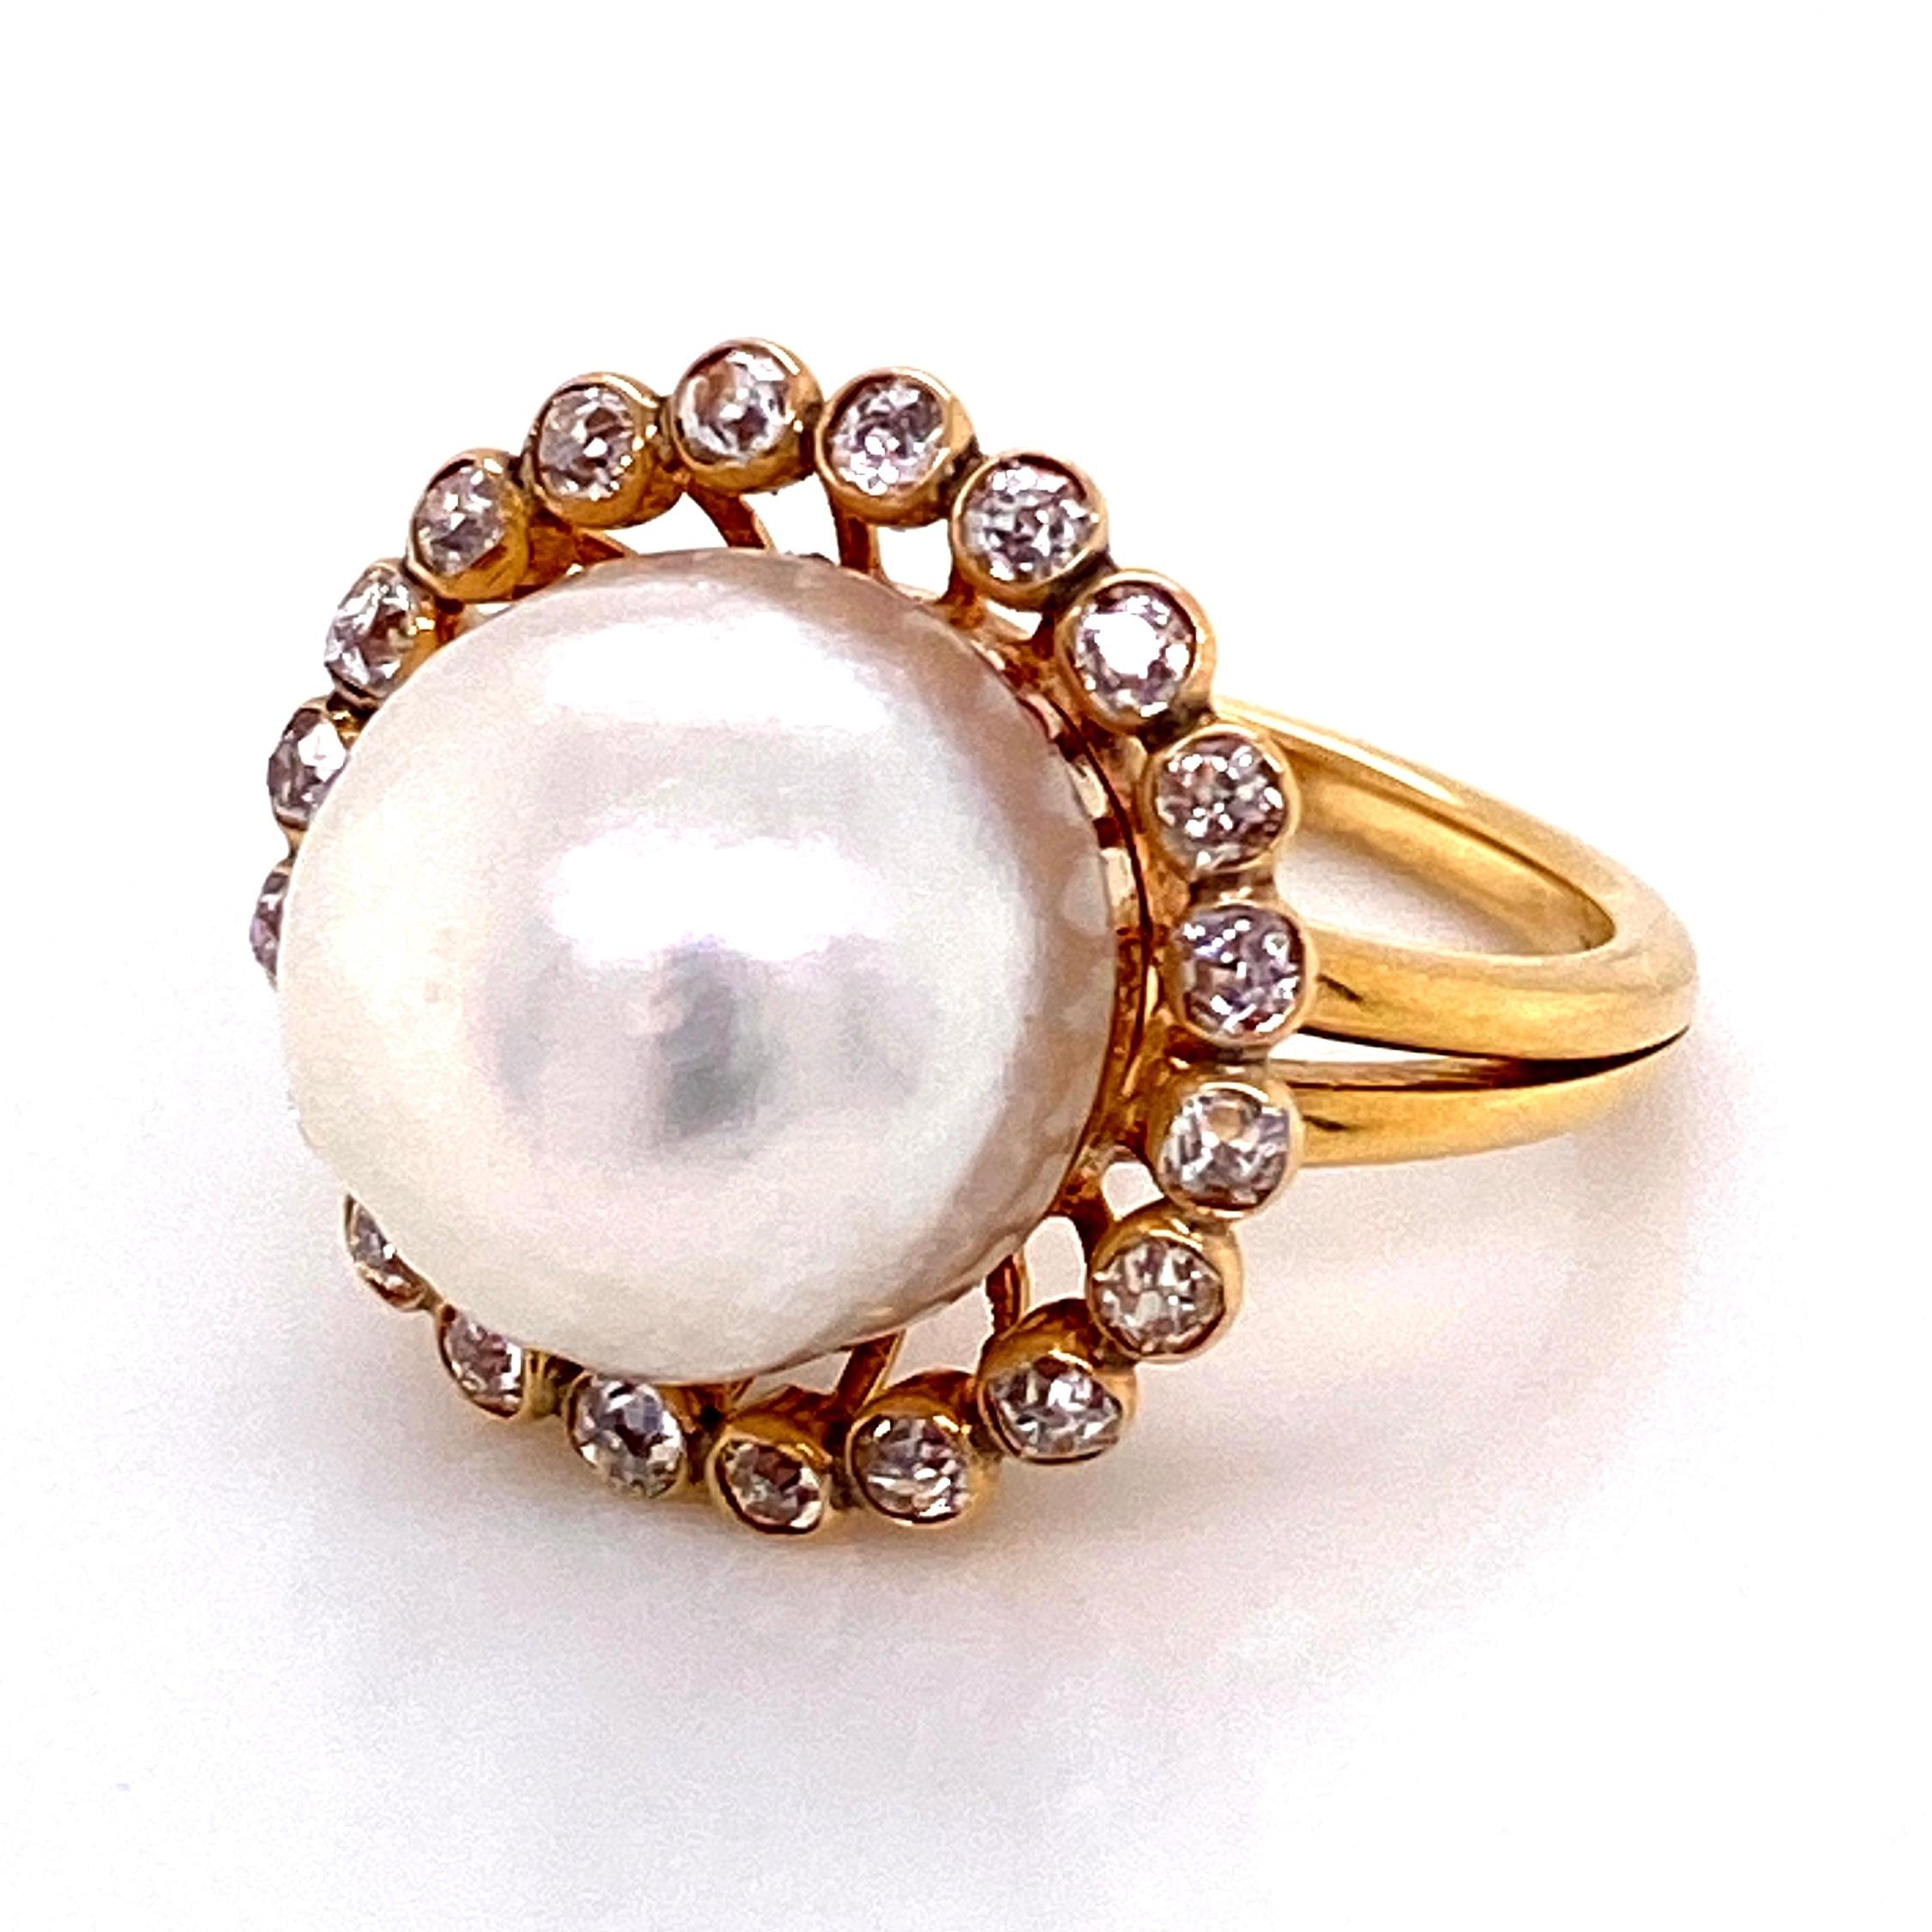 Pearl and Old European Diamond Victorian Gold Ring Estate Fine Jewelry 2